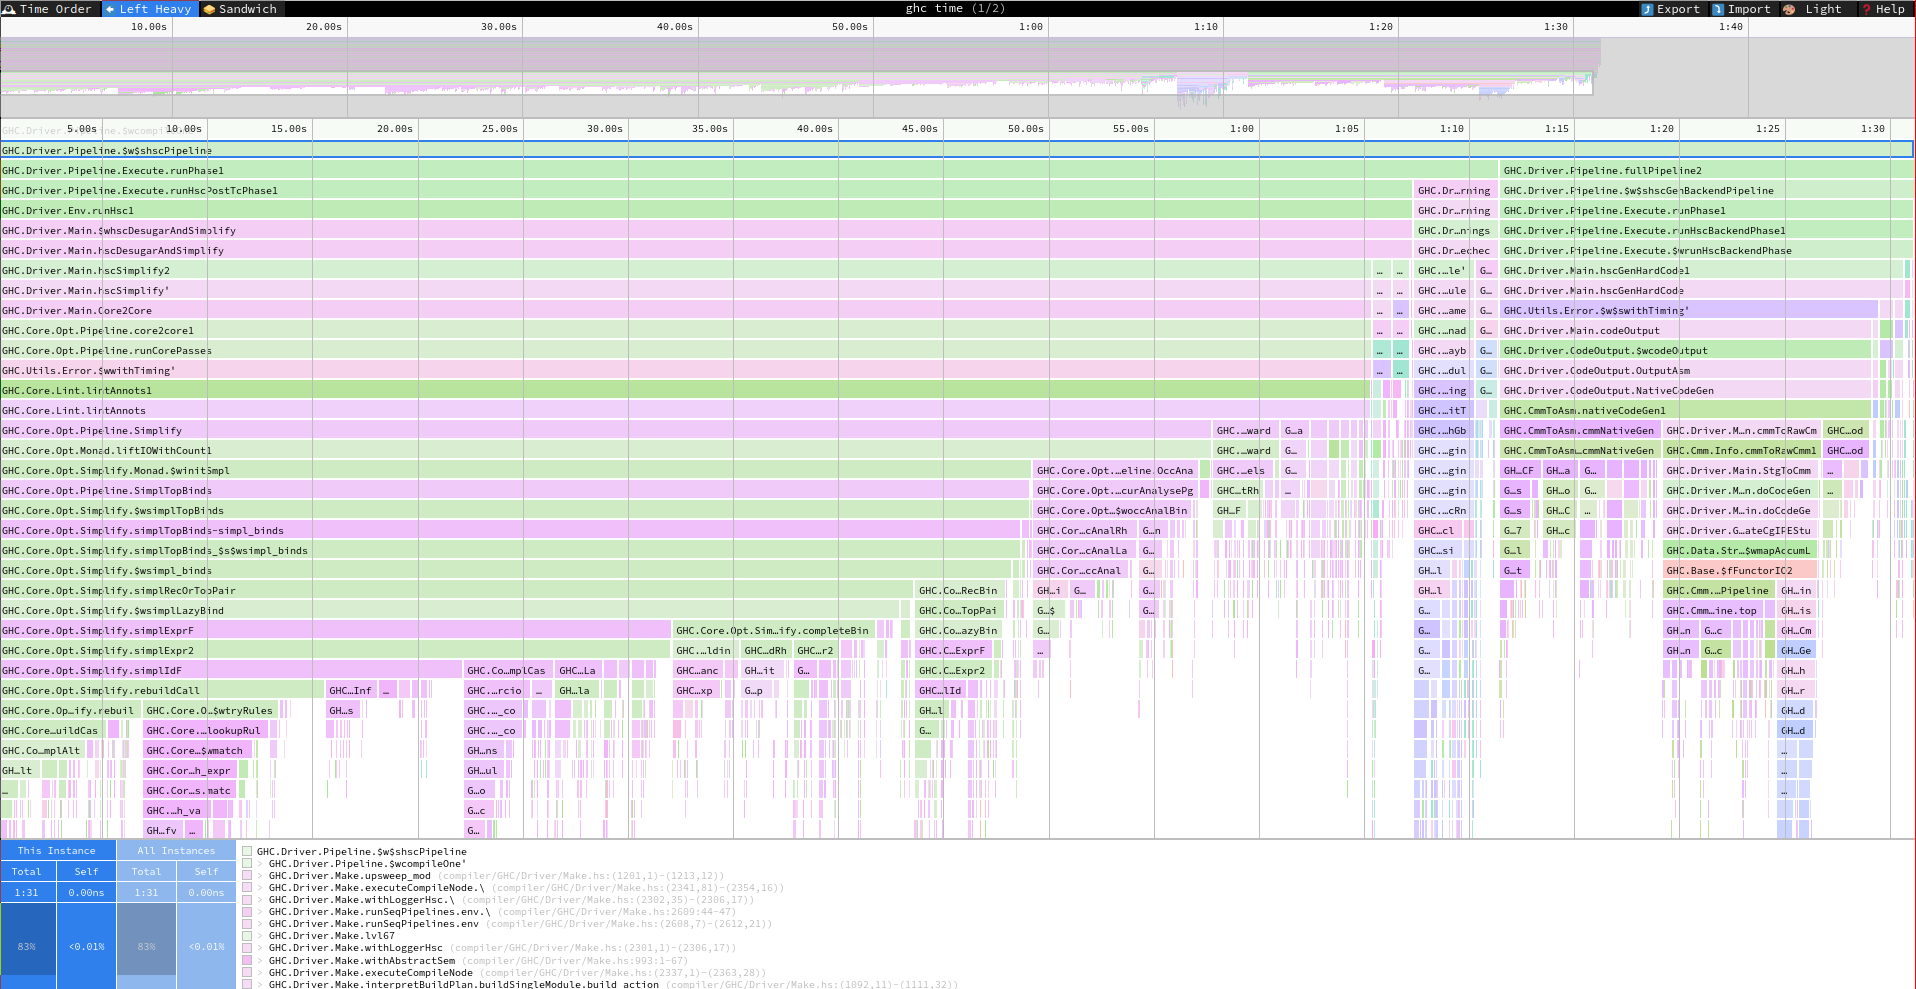 speedscope visualisation of a profile of GHC compiling Cabal